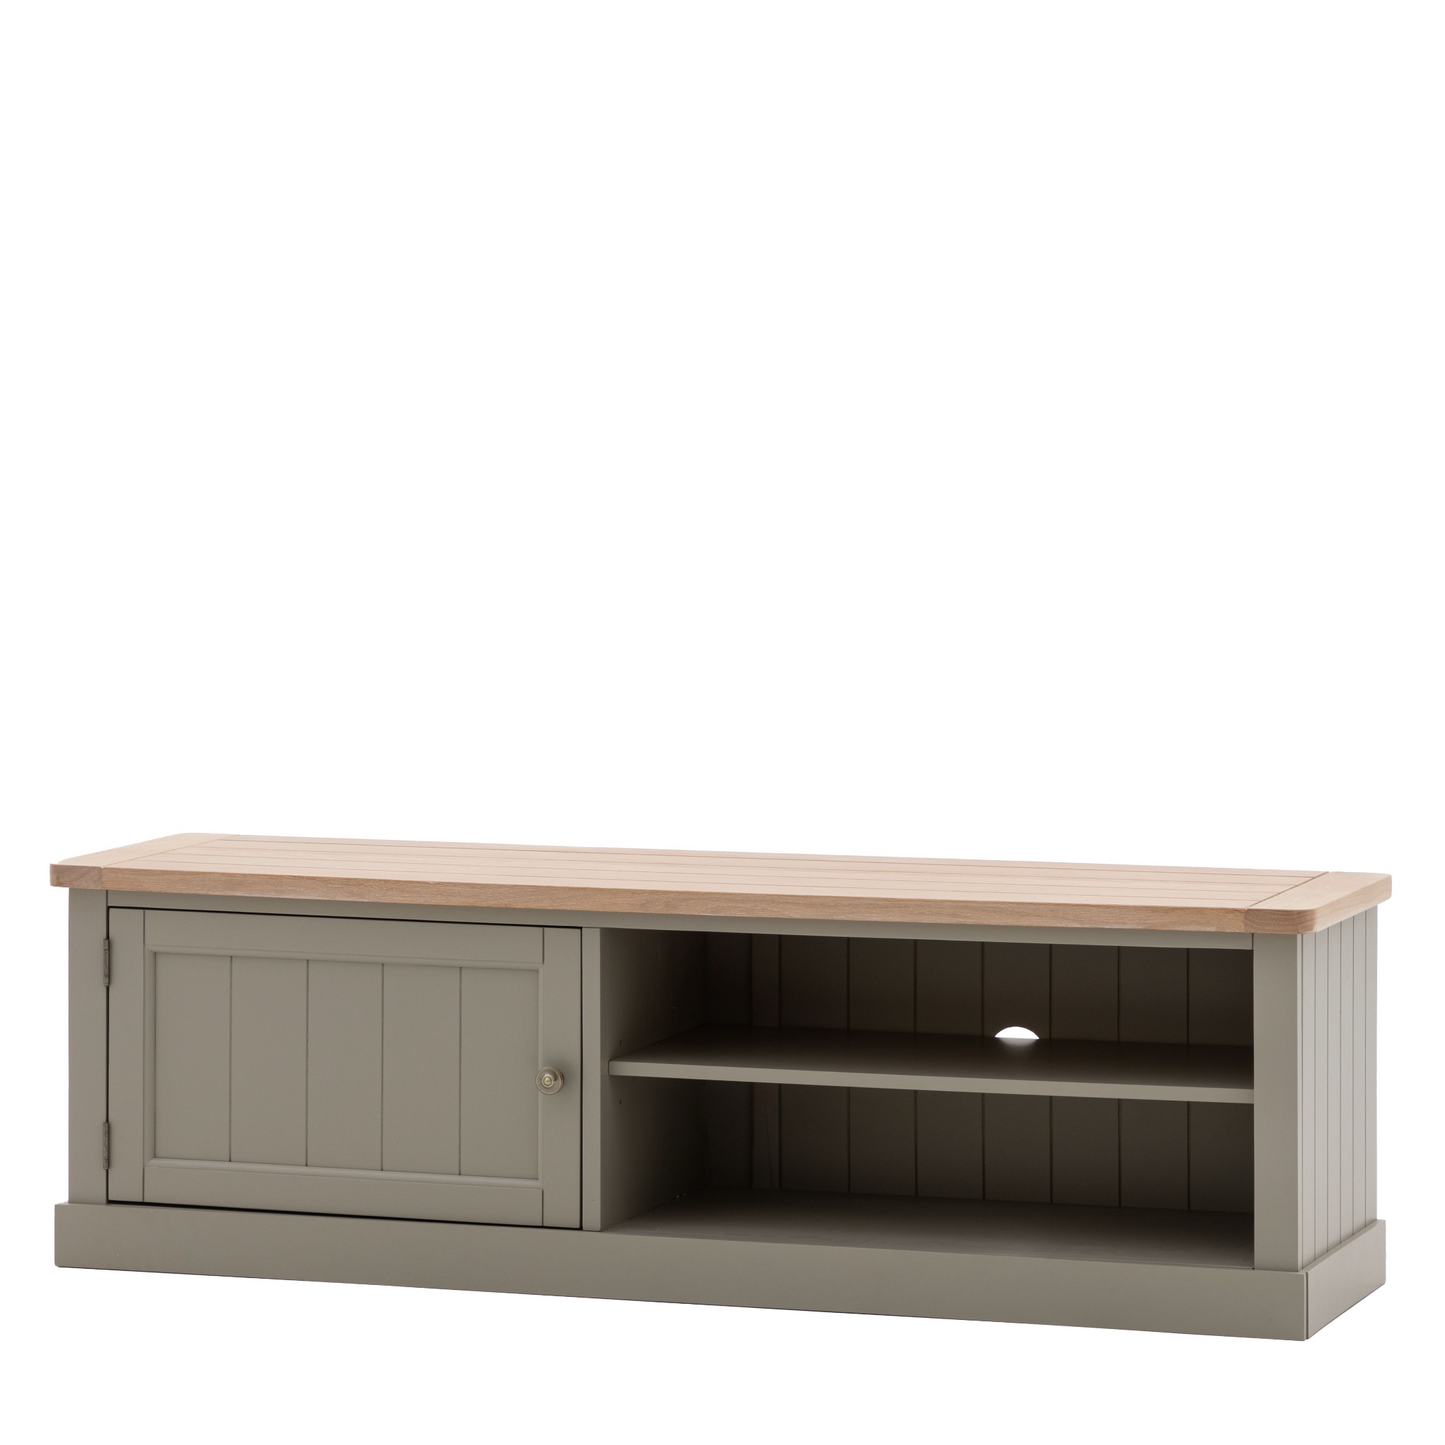 A Buckland Media Unit in Prairie with a wooden top from Kikiathome.co.uk for home furniture and interior decor.